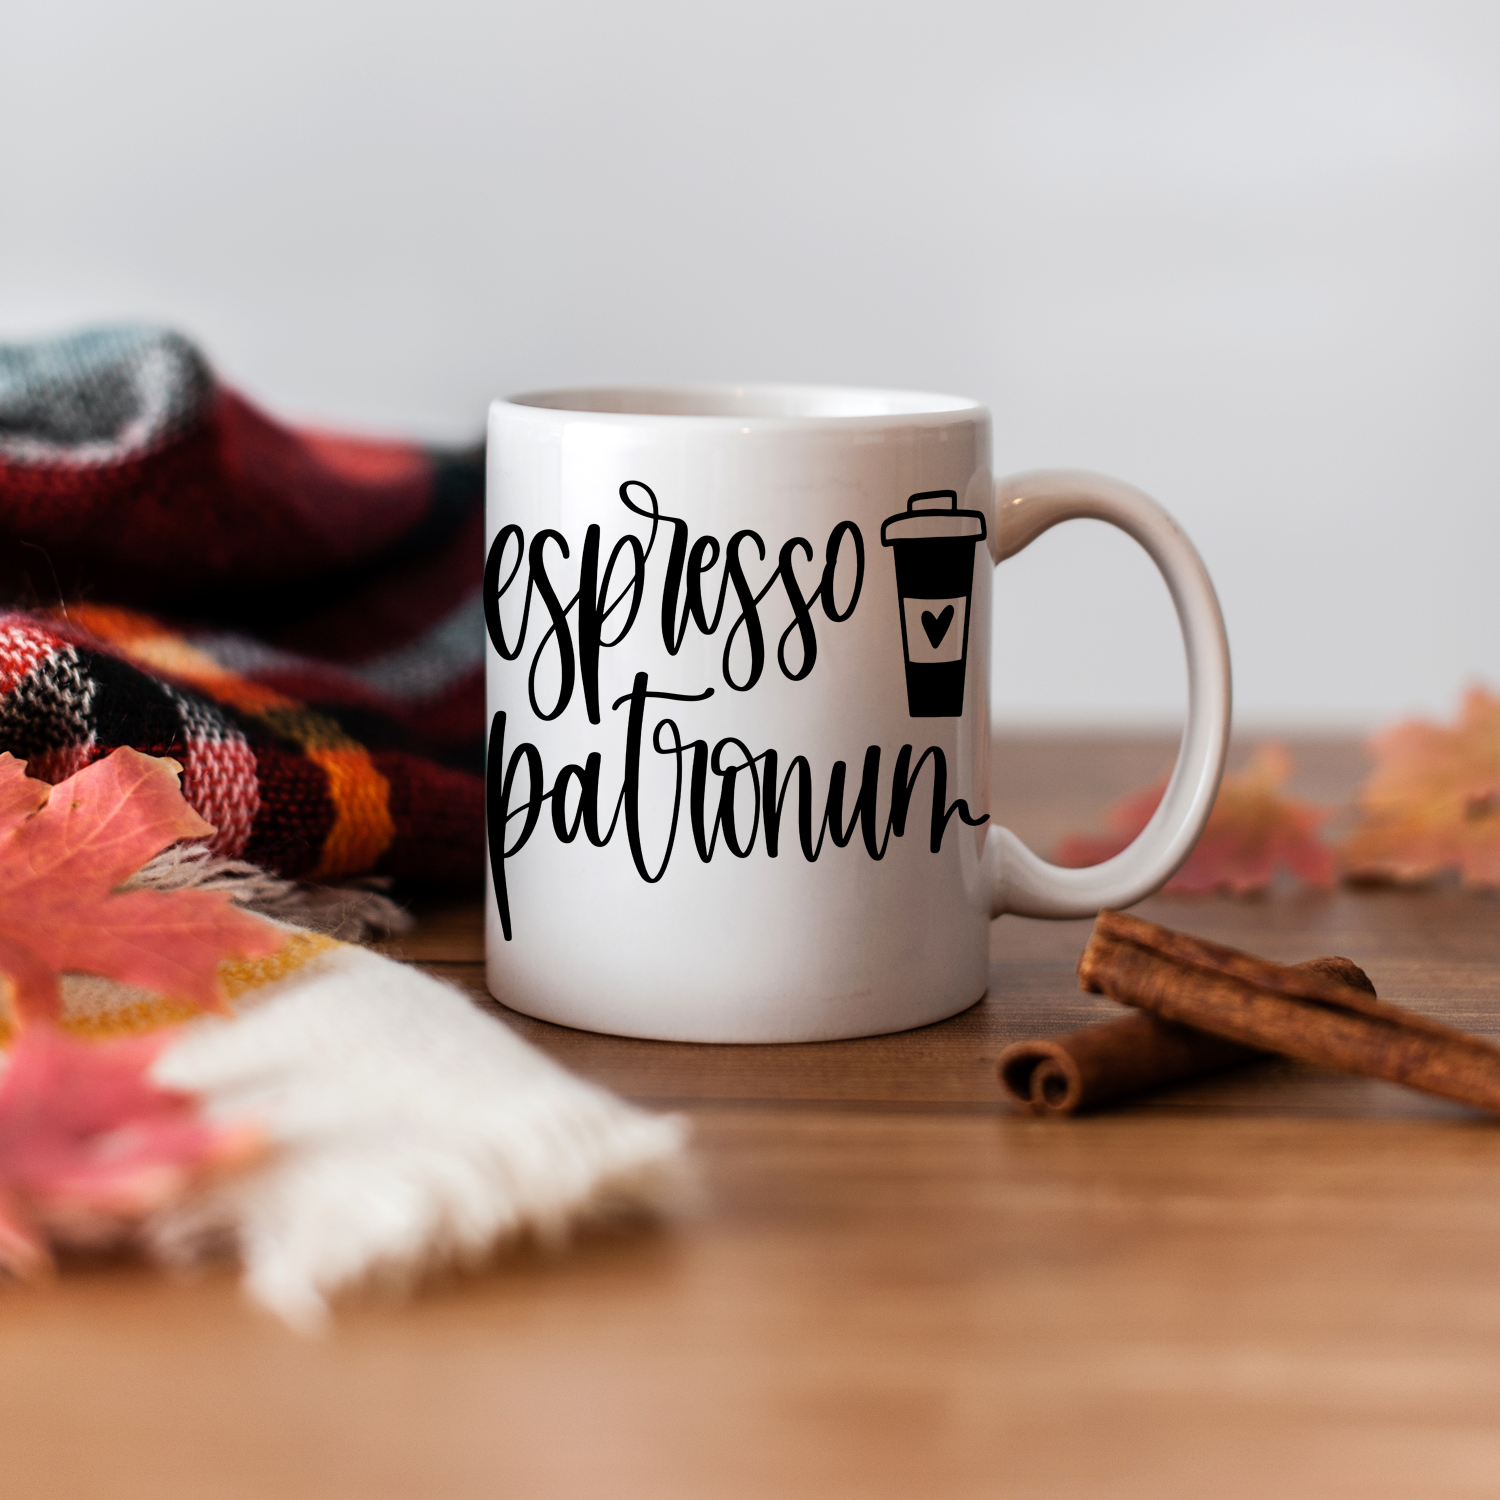 Espresso Patronum Funny Coffee Front & Back Stainless Steel Travel Mug